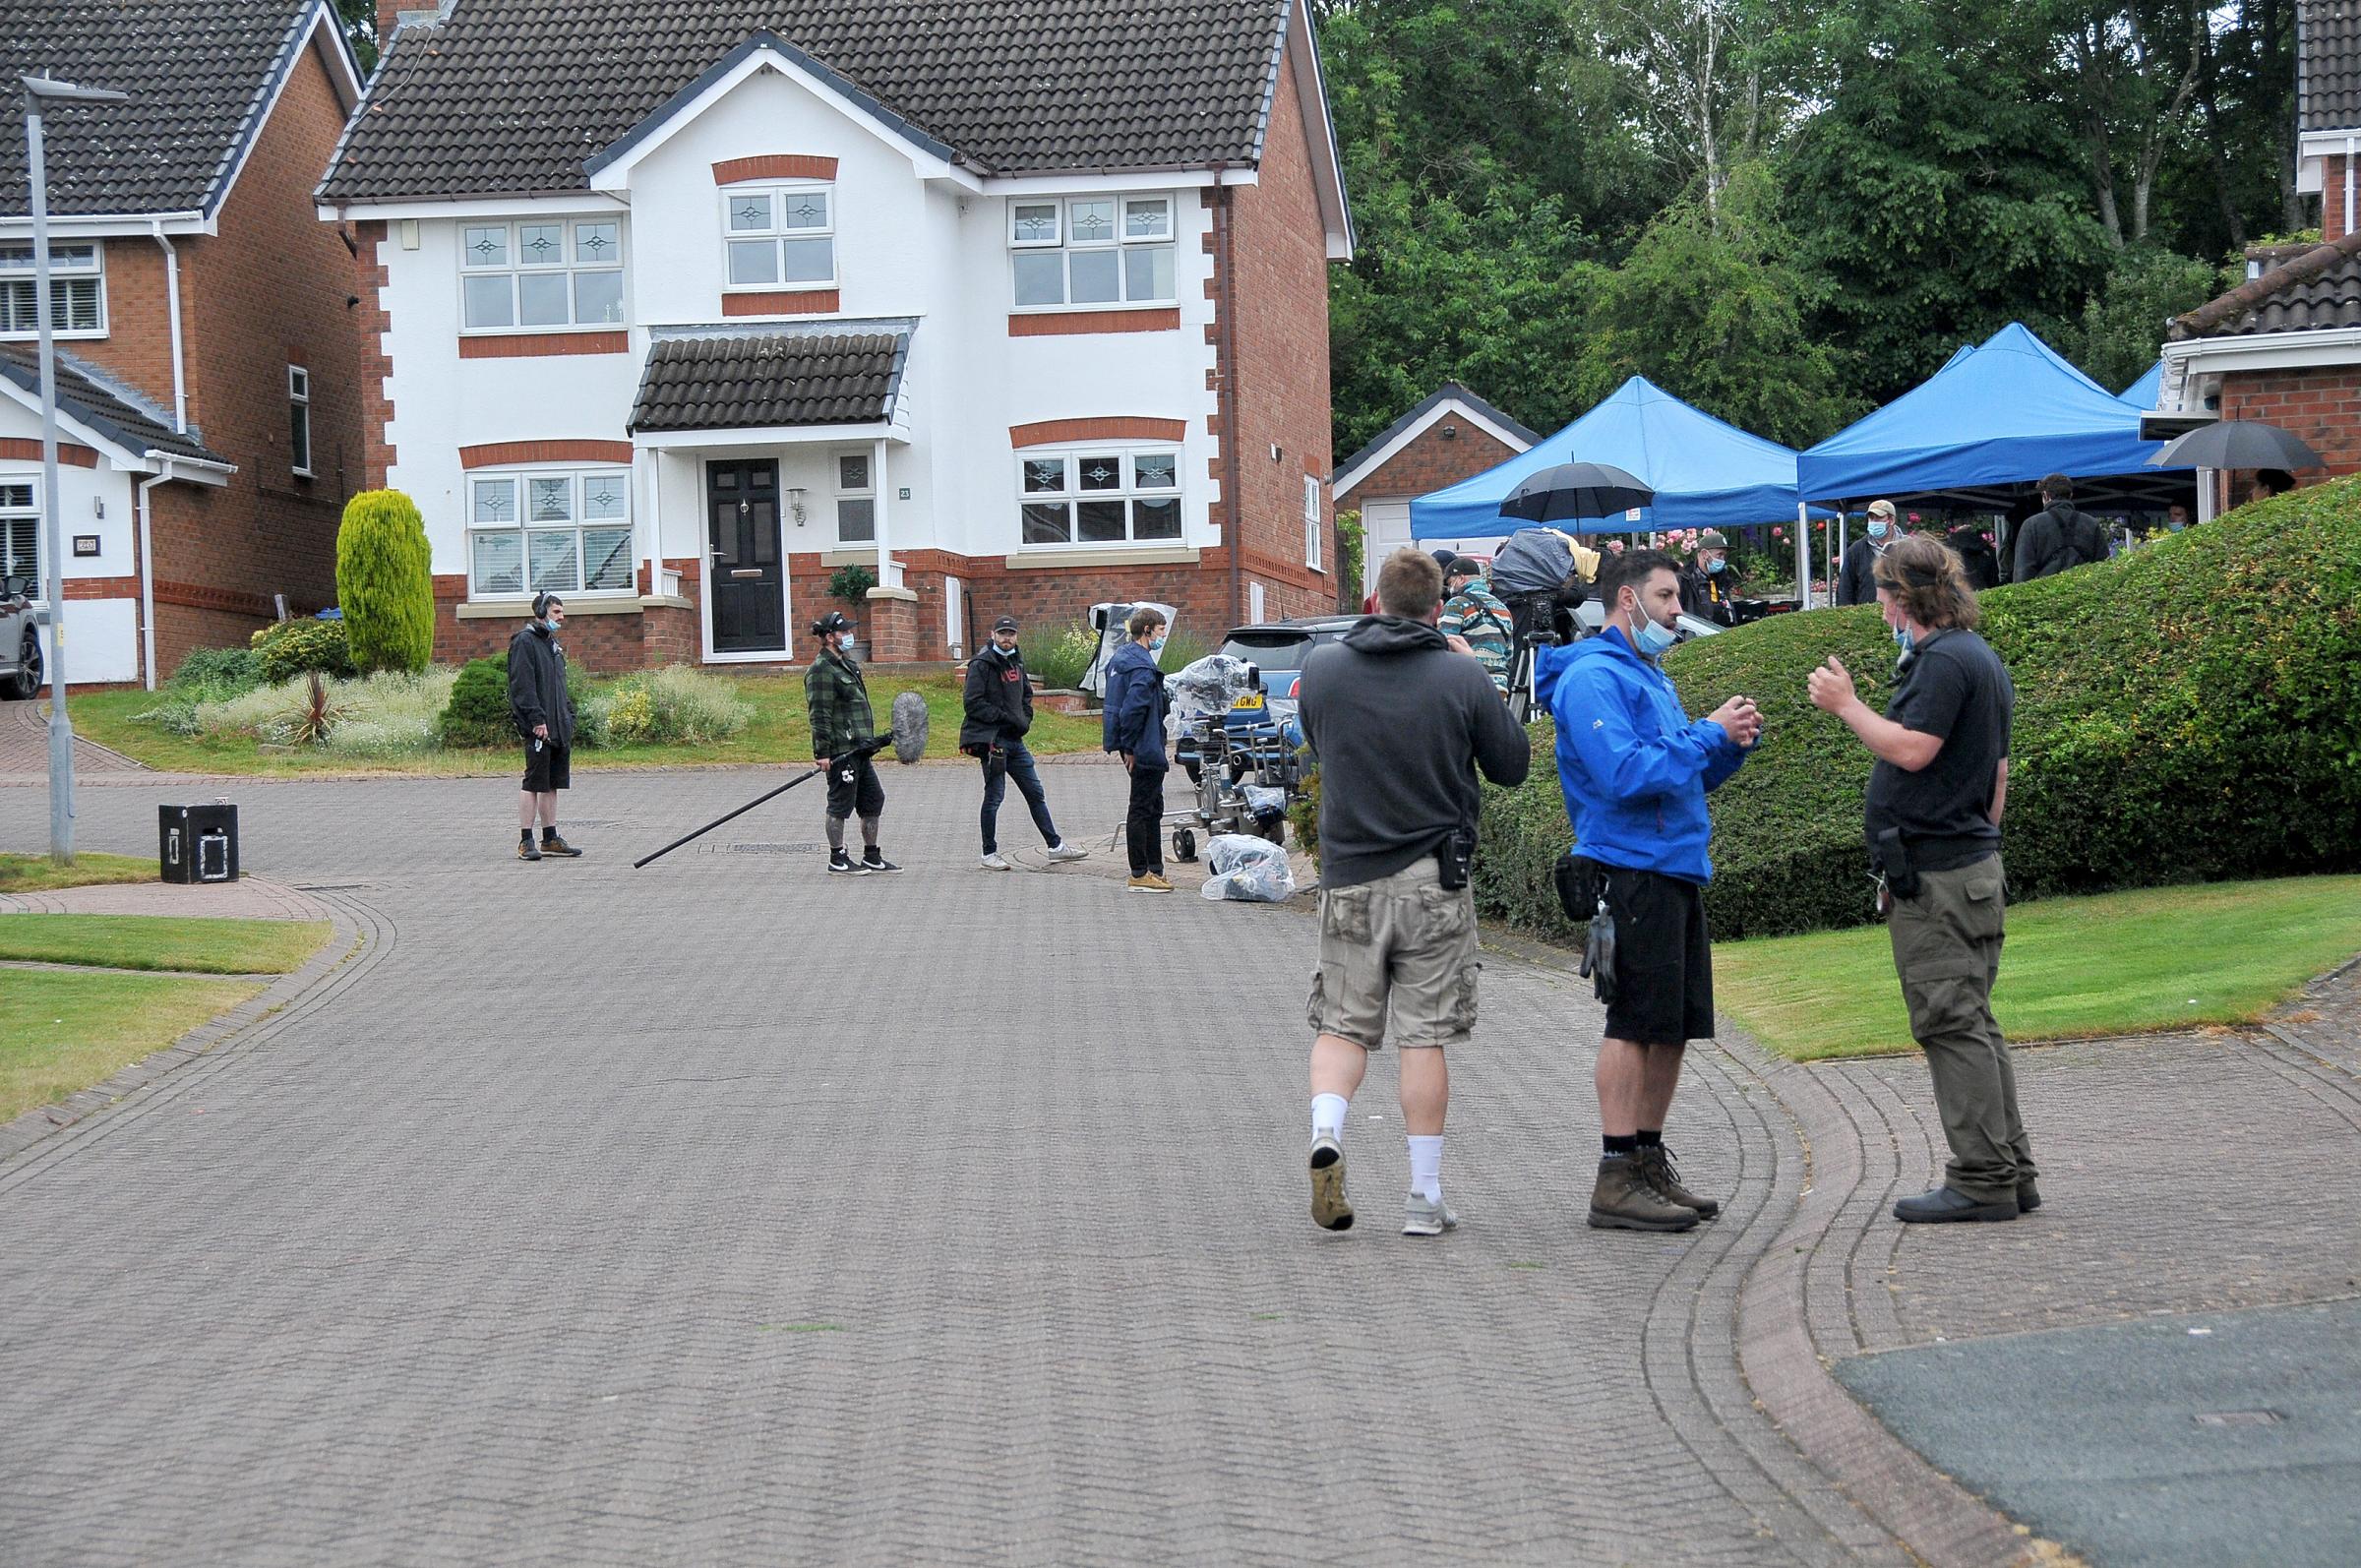 Where was Rules of the Game filmed? BBC drama is set in the North West